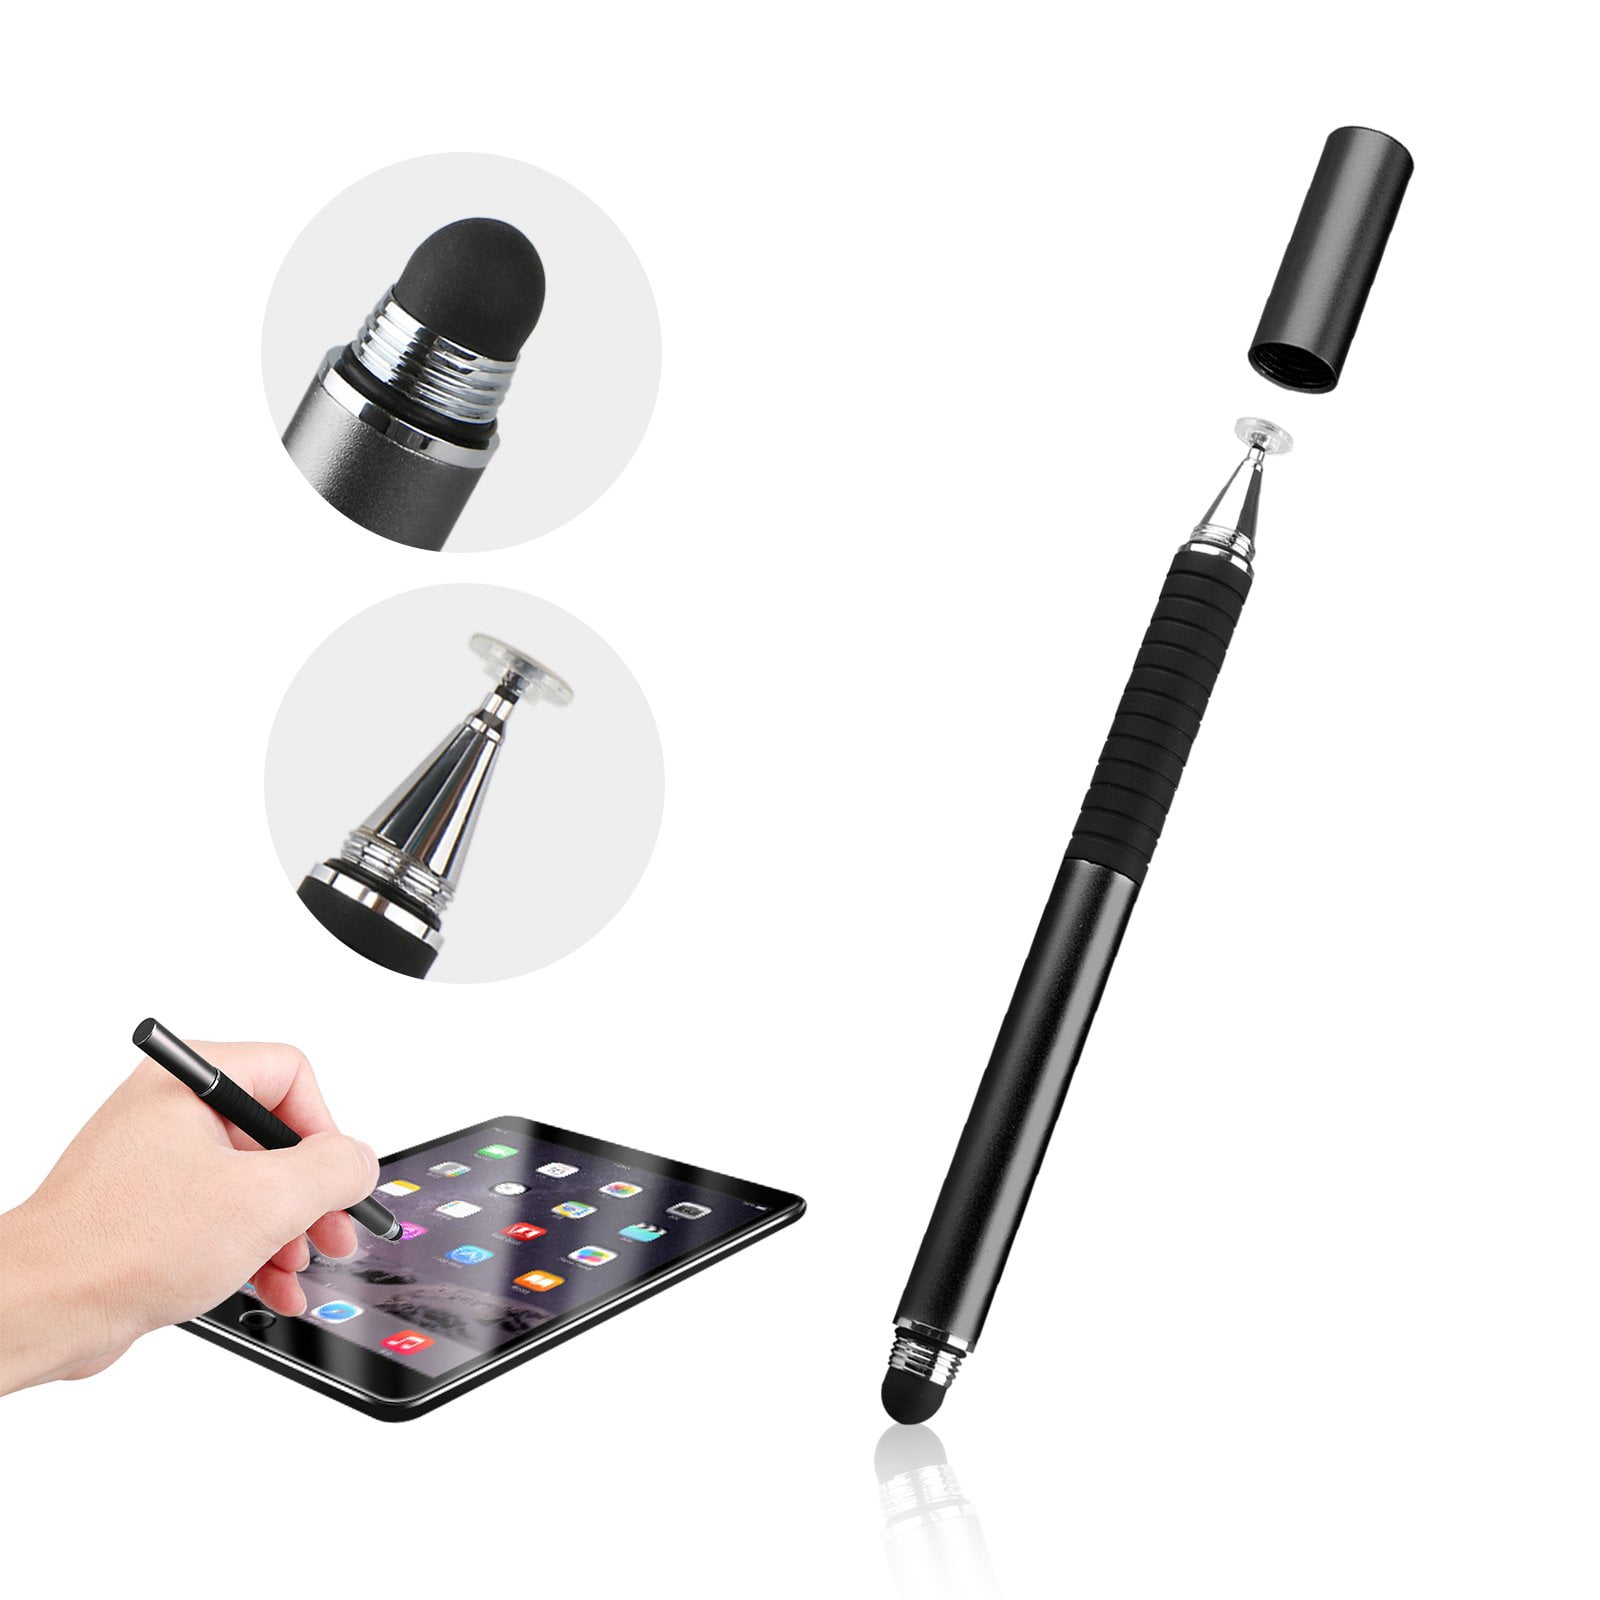 2 in 1 Luxury Fine Point Stylus Pen for Apple iPad Air, iPhone X 8, Samsung  Galaxy Tablet, Kindle 